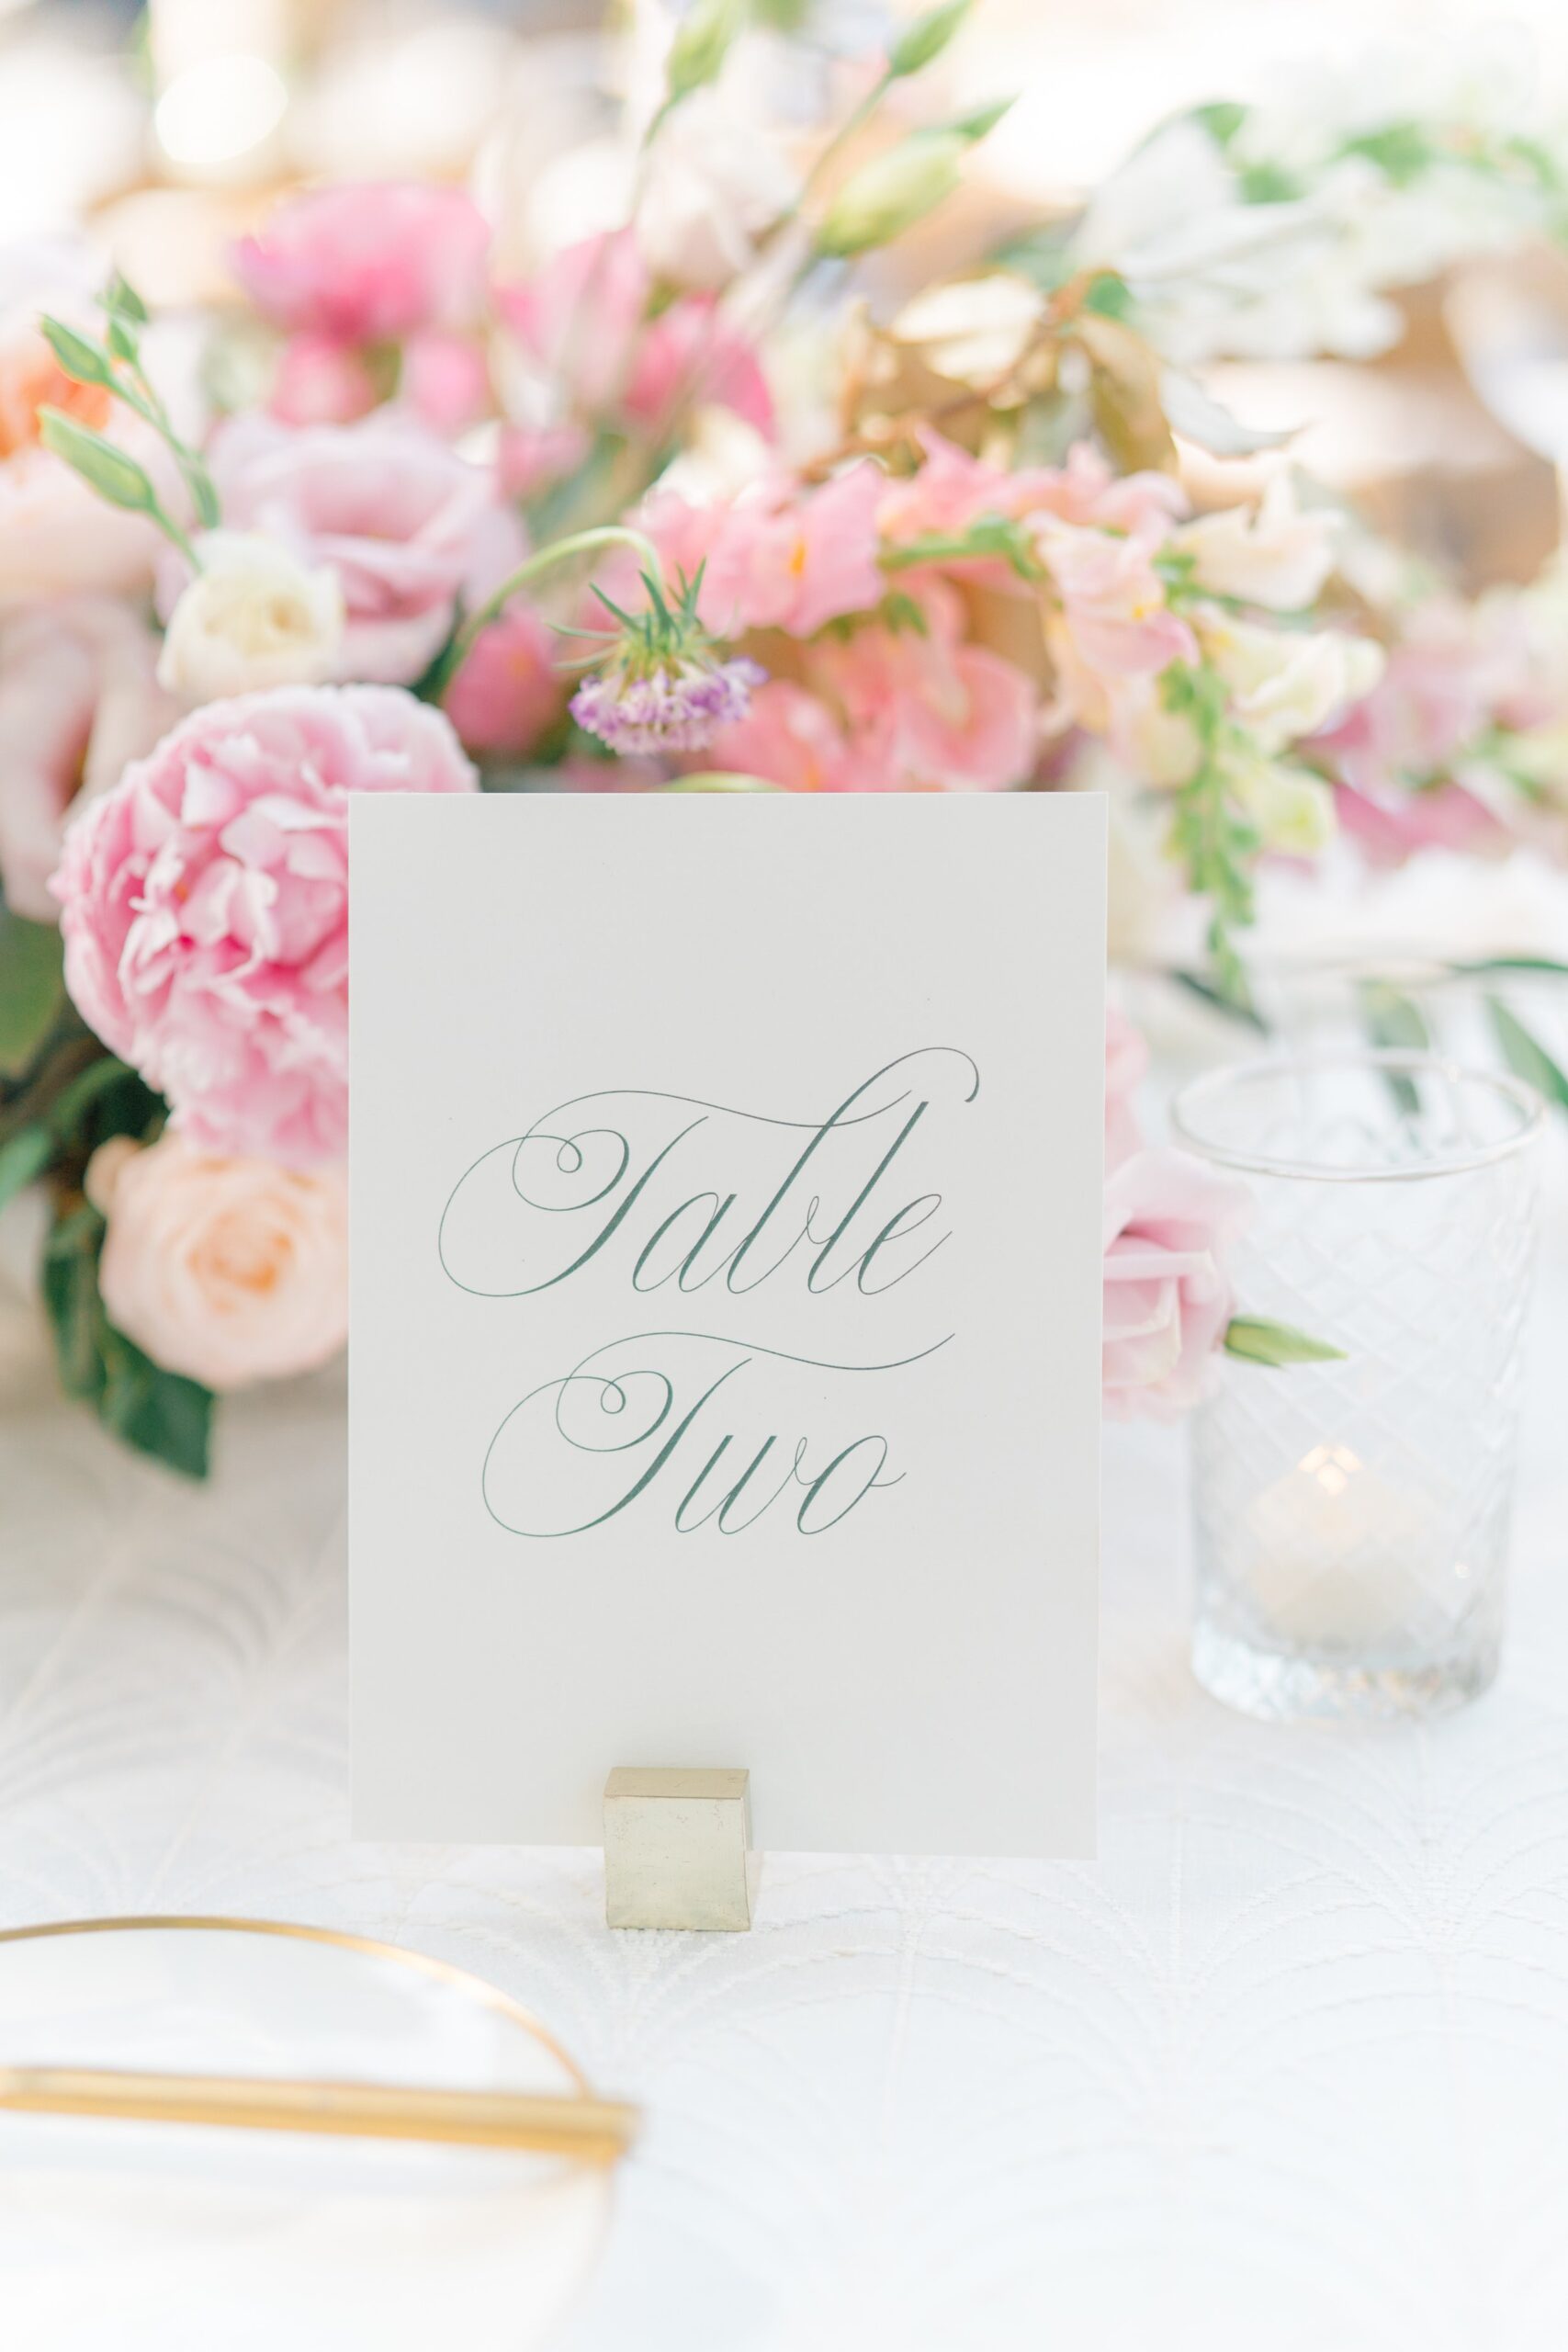 script table numbers and pink flowers. garden party outdoor reception